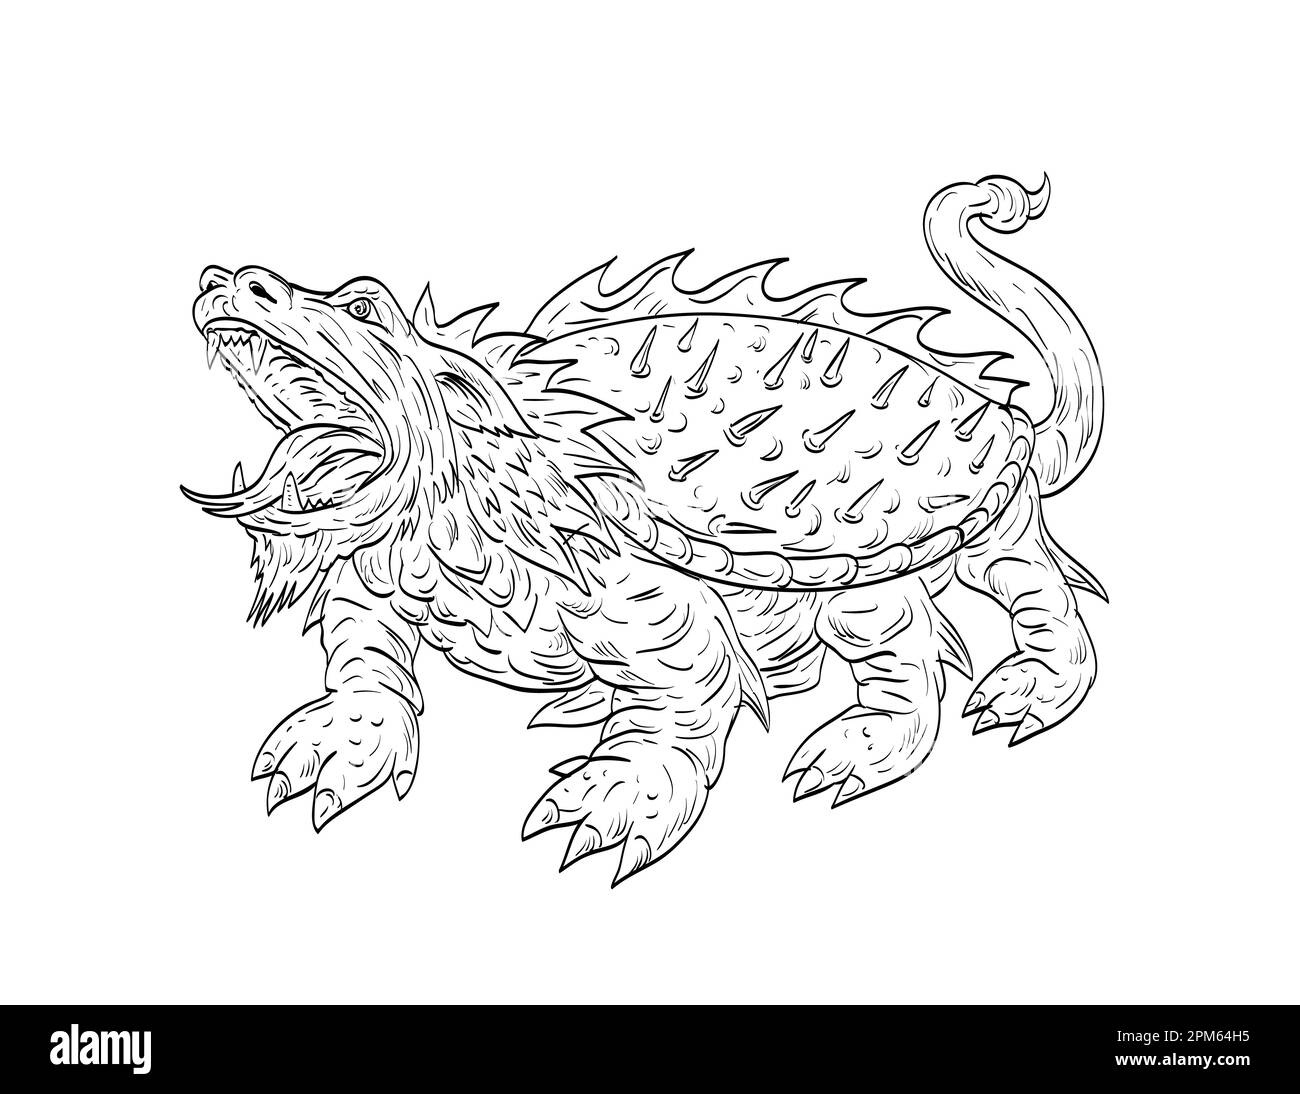 Line art drawing illustration of Tarasque, a fearsome legendary dragon-like mythological hybrid from Provence, France tamed by Saint Martha done in me Stock Photo